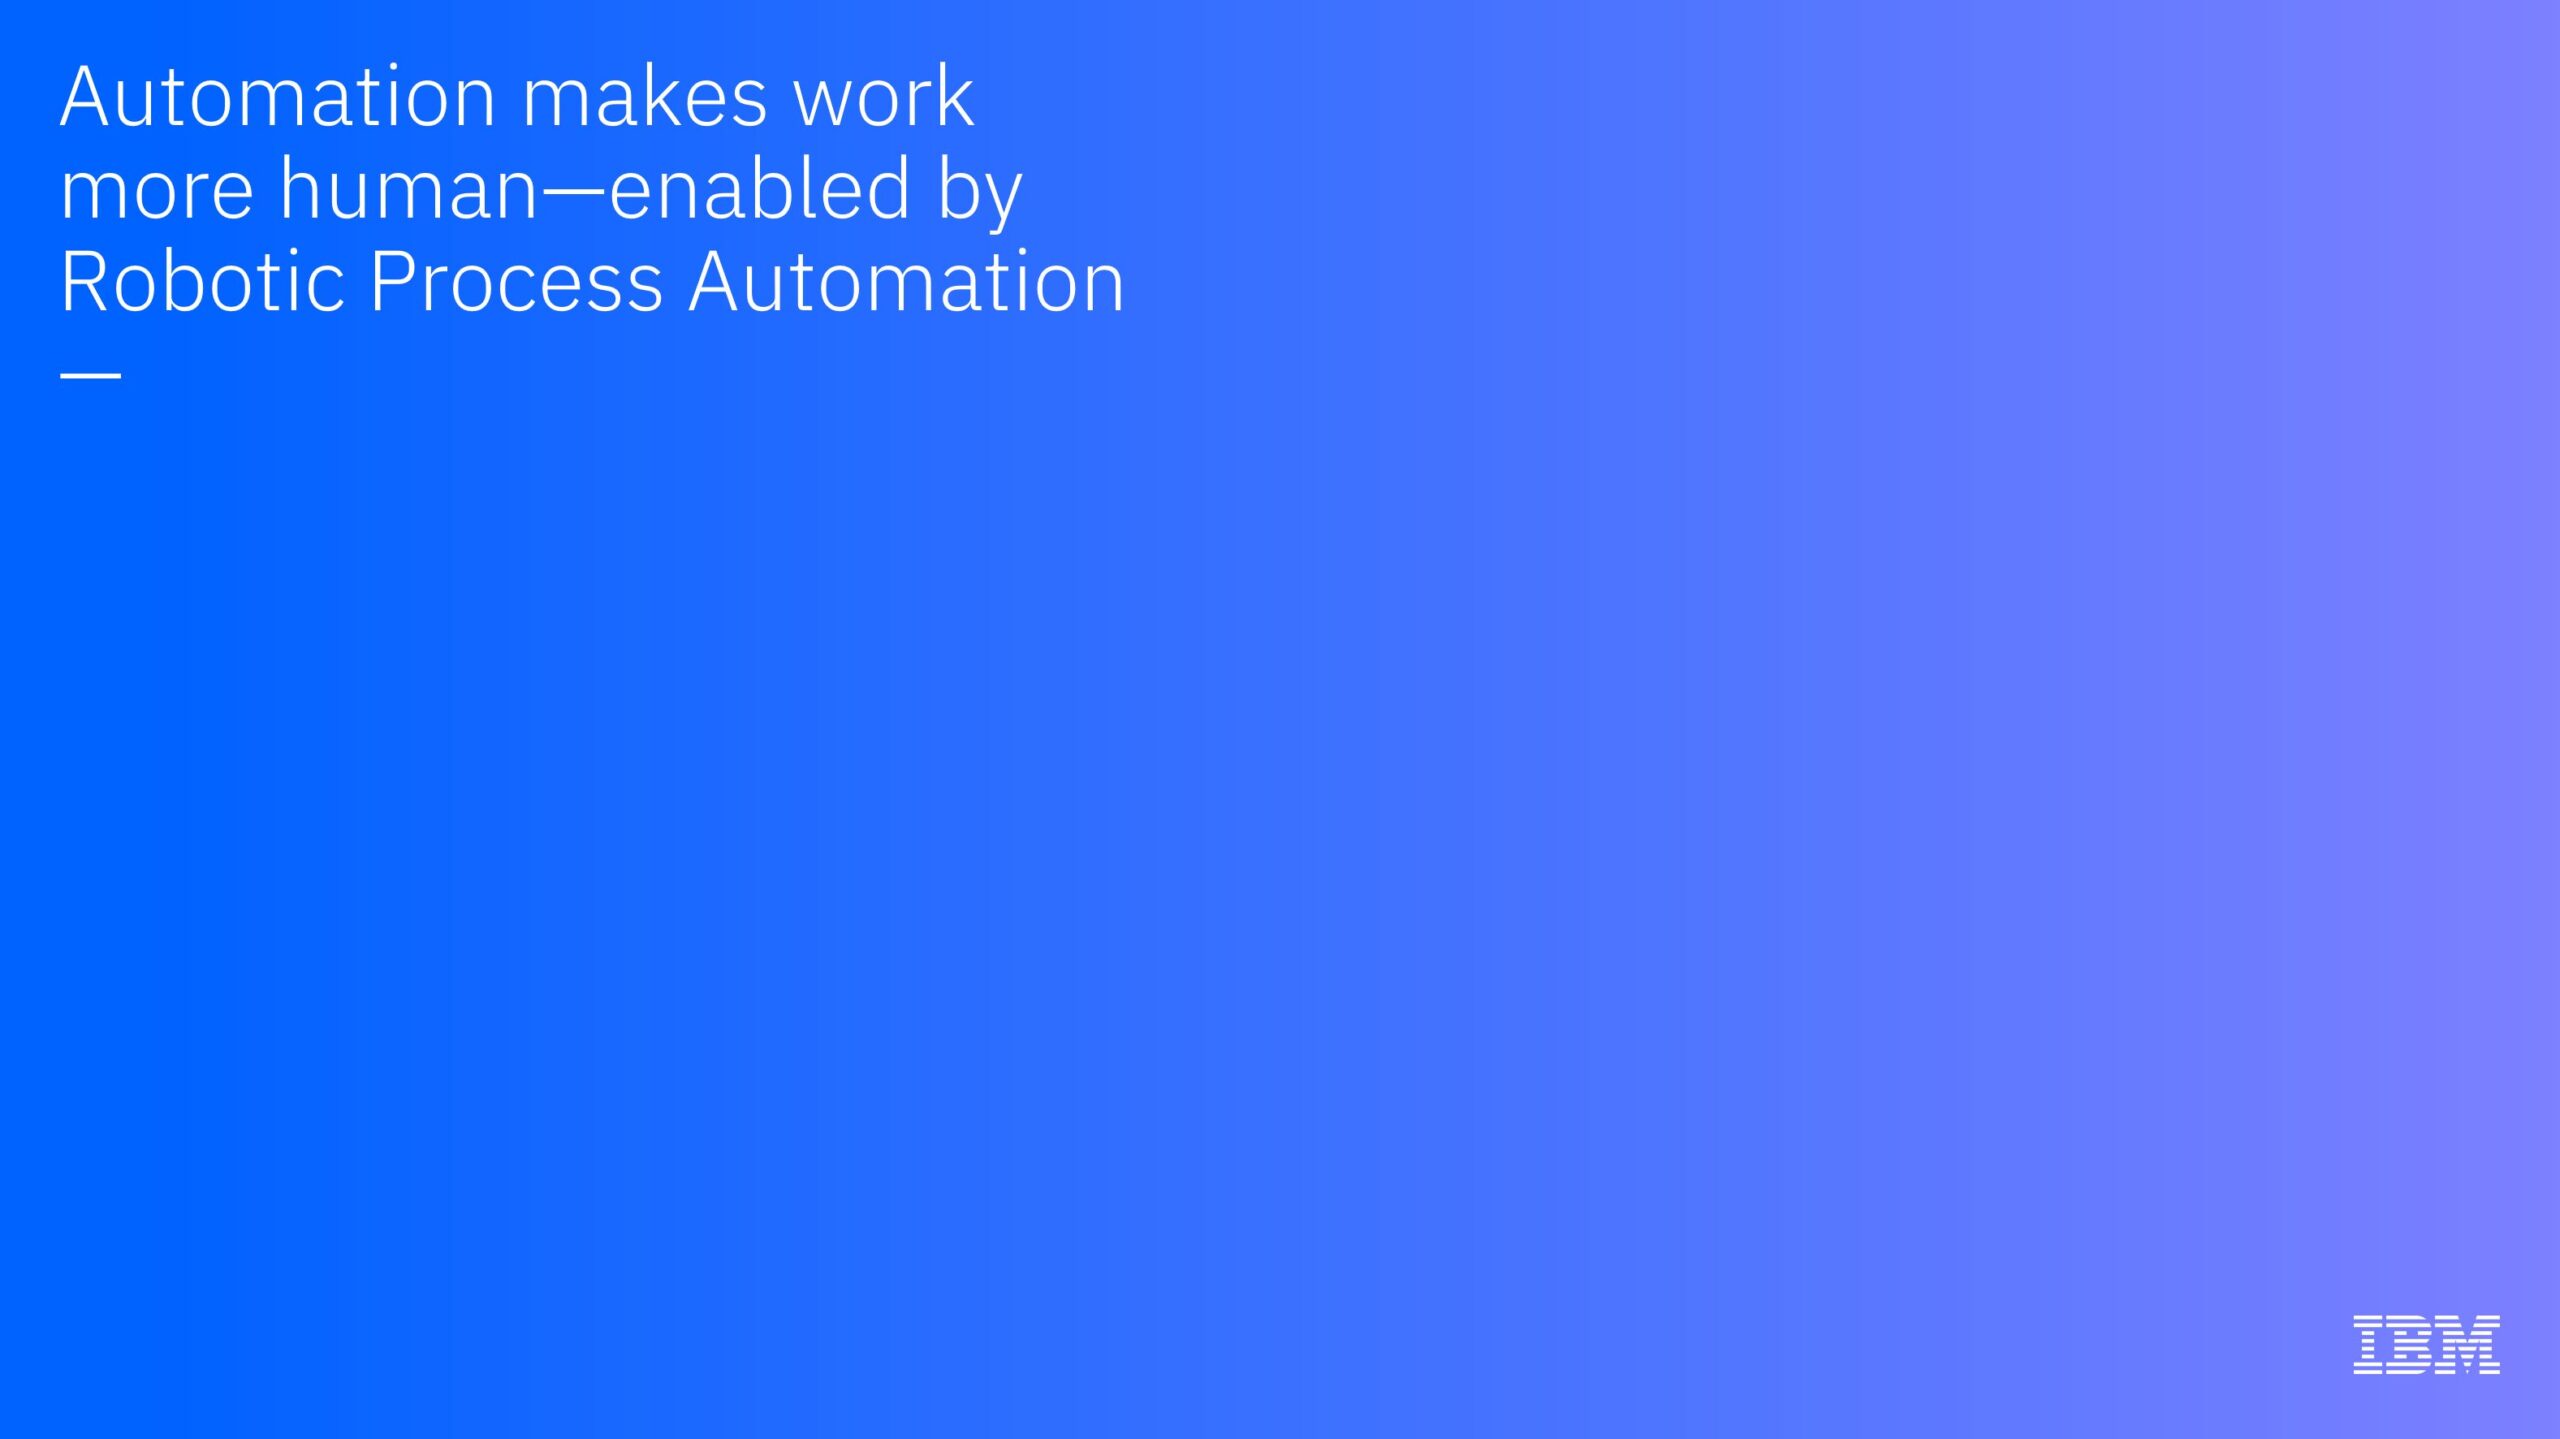 Automation makes work more human-enabled by RPA